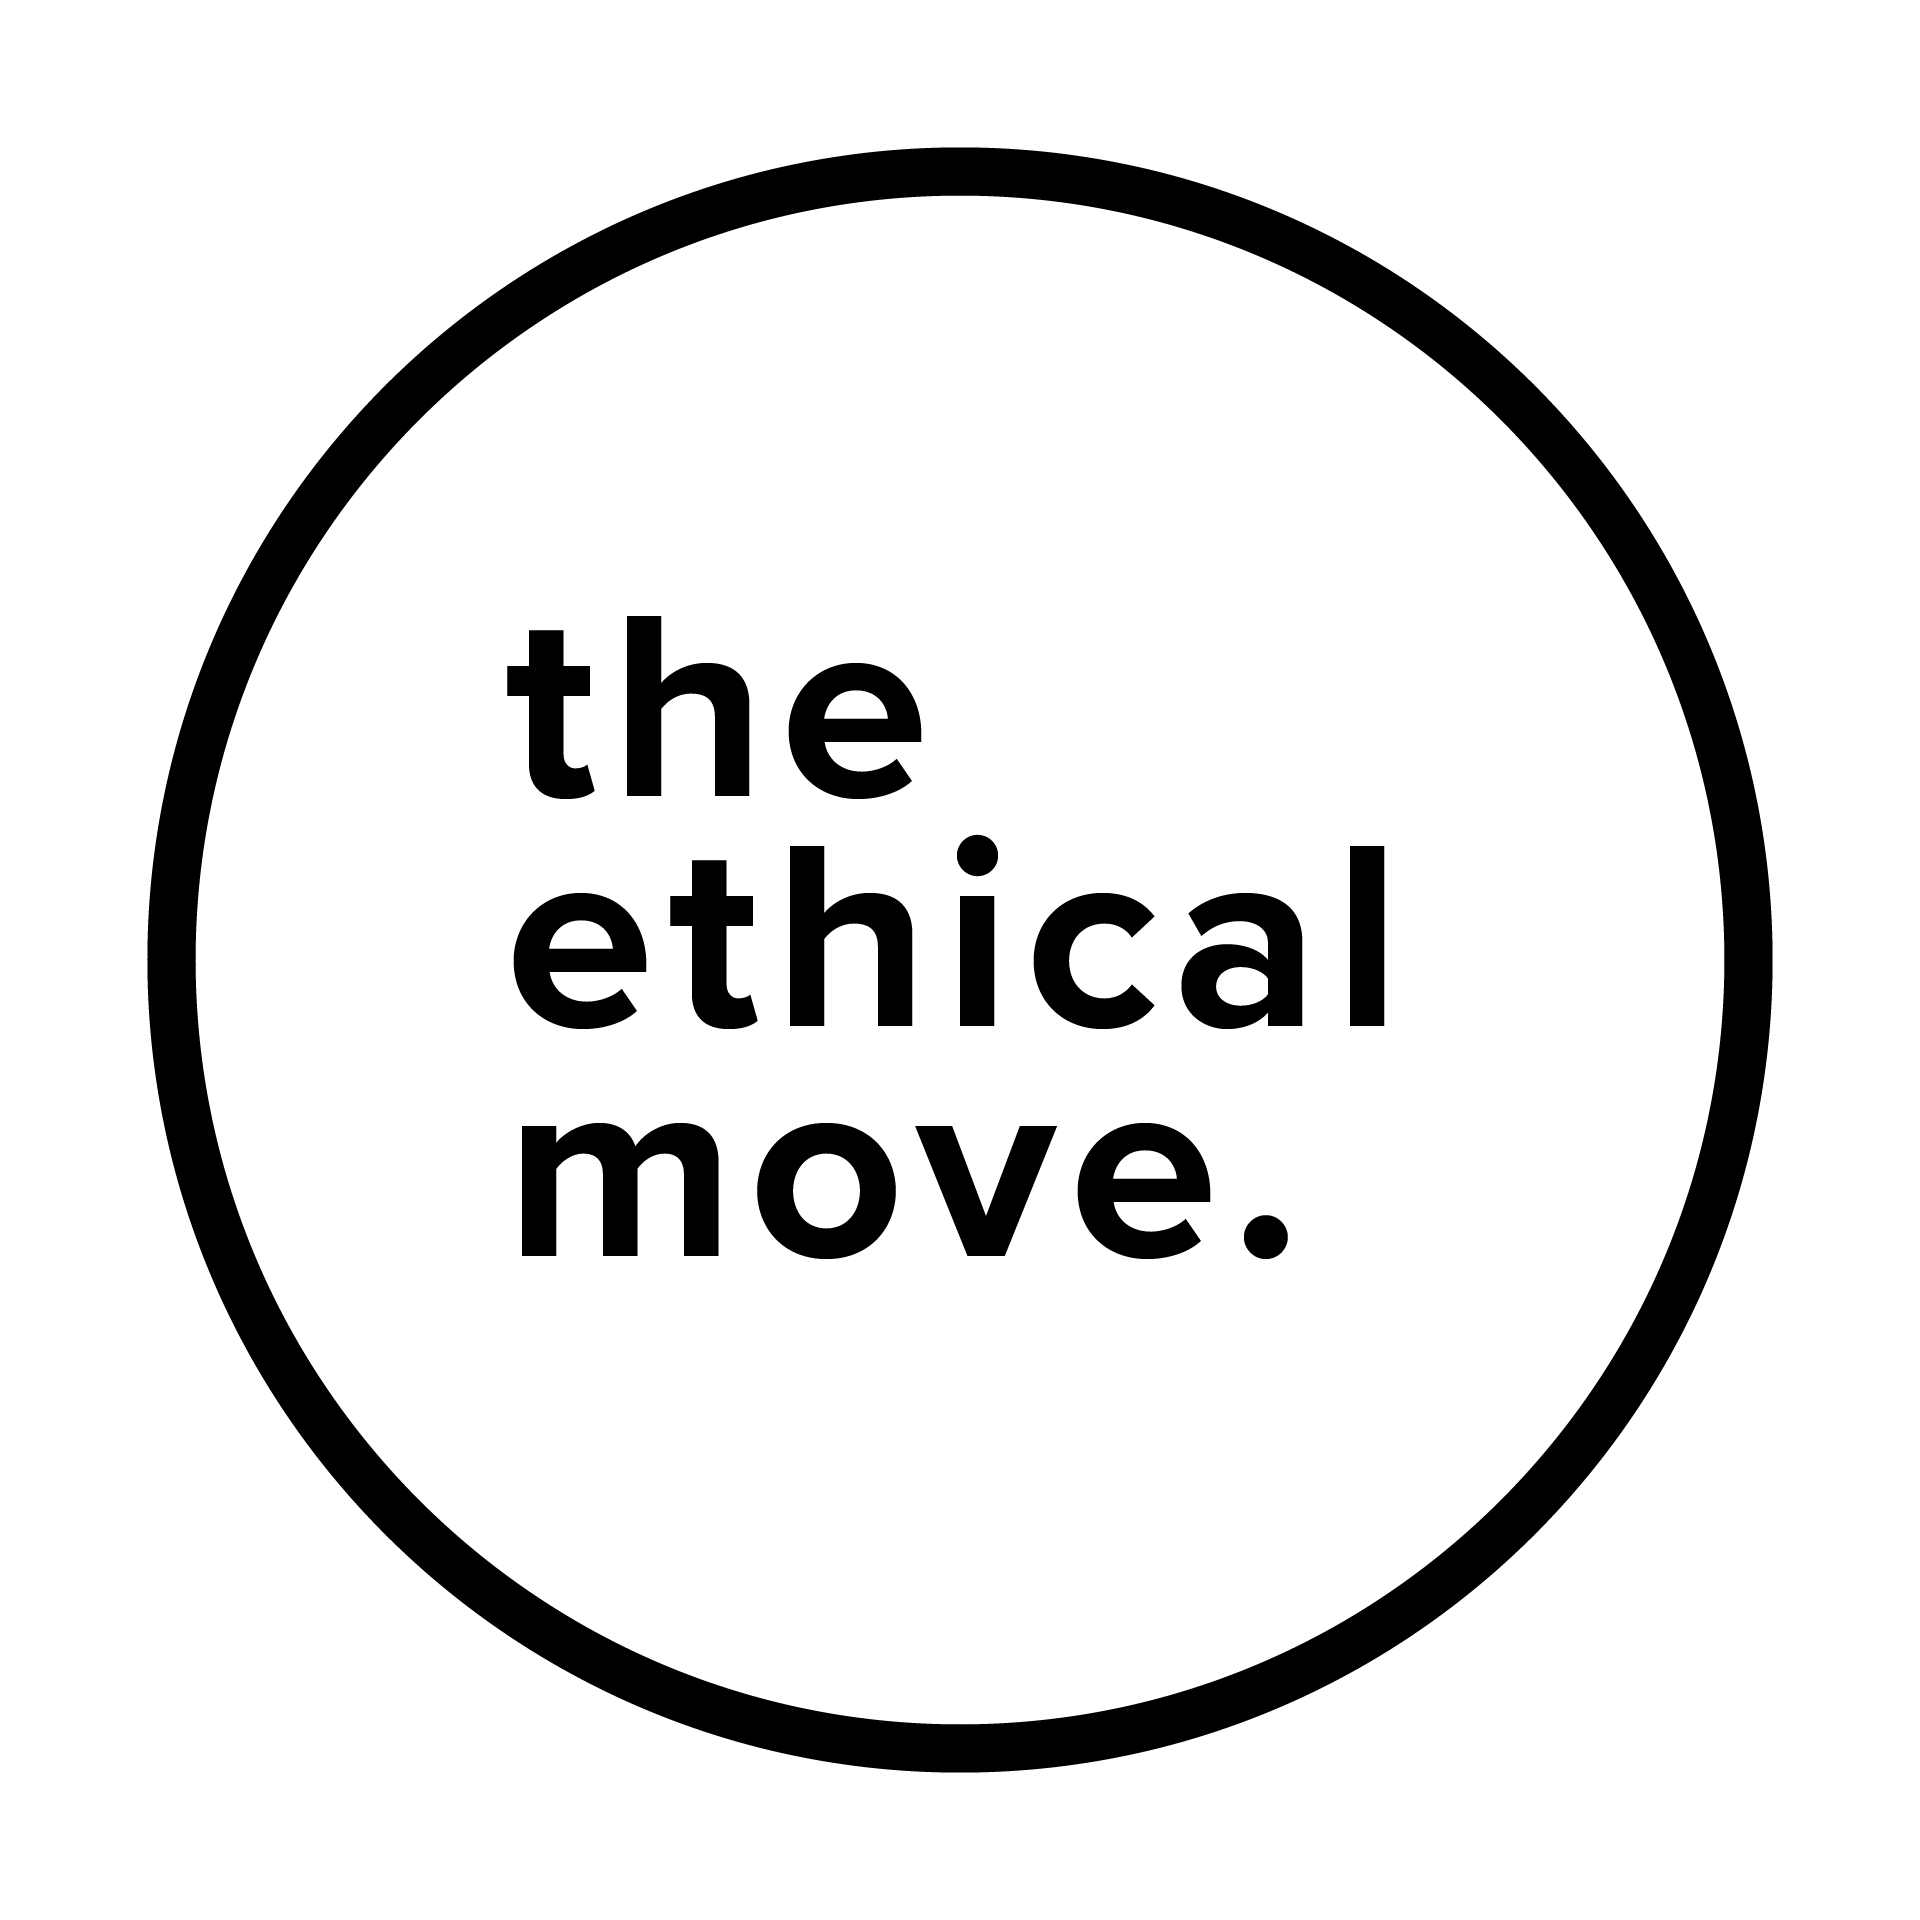 The Ethical Move logo in [white on black] [with values in a circle outline: Honesty, Responsibility, Trust, Transparency, Integrity, Equity]. Links to theethicalmove.org